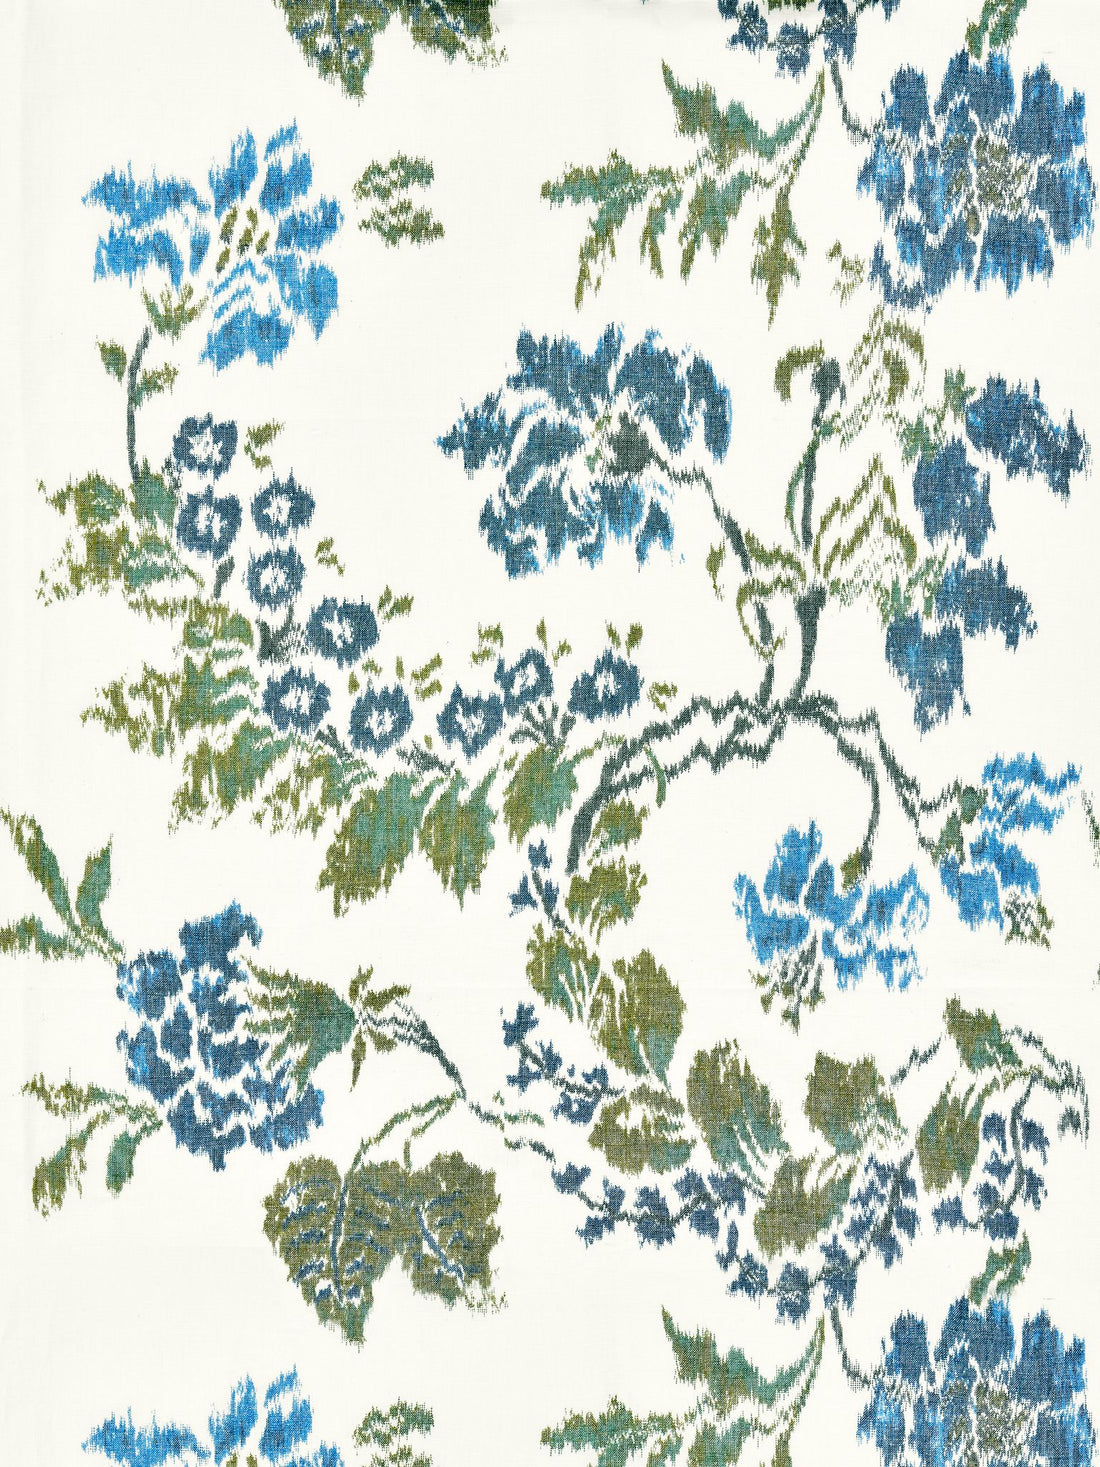 Kew Gardens Warp Print fabric in blues on ivory color - pattern number SC 000216611 - by Scalamandre in the Scalamandre Fabrics Book 1 collection